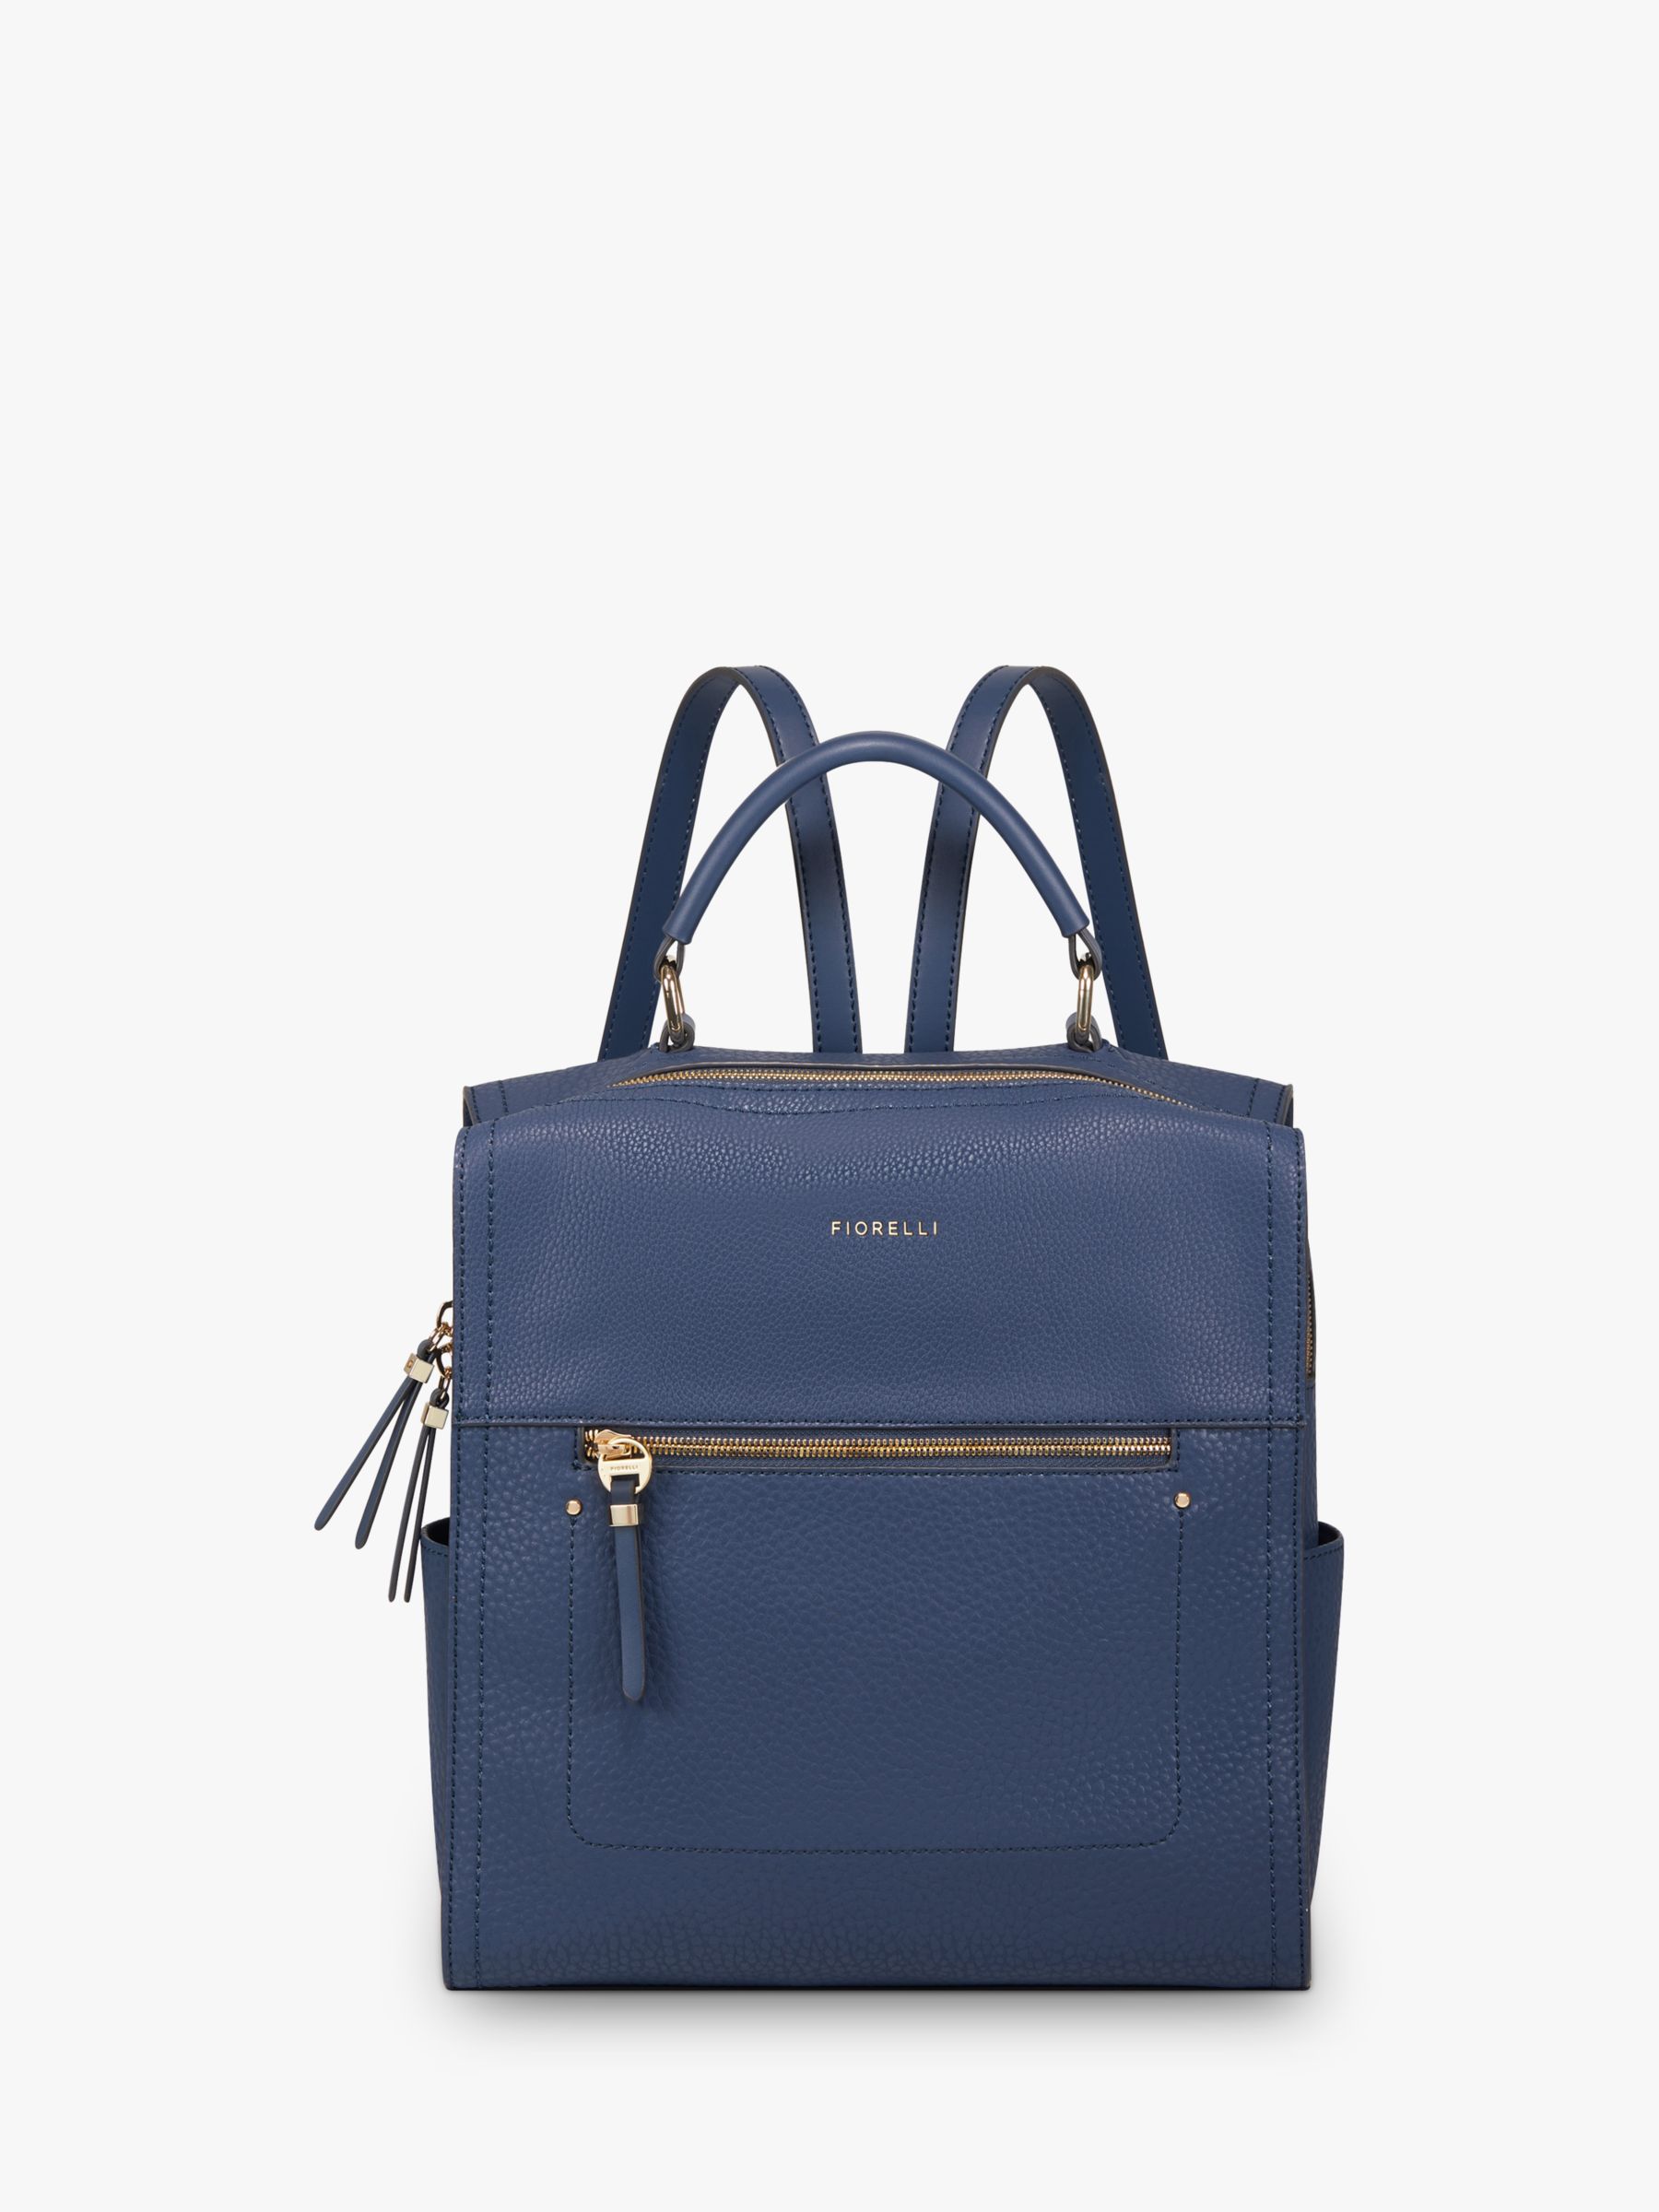 Fiorelli Anna Backpack | Storm at John Lewis & Partners